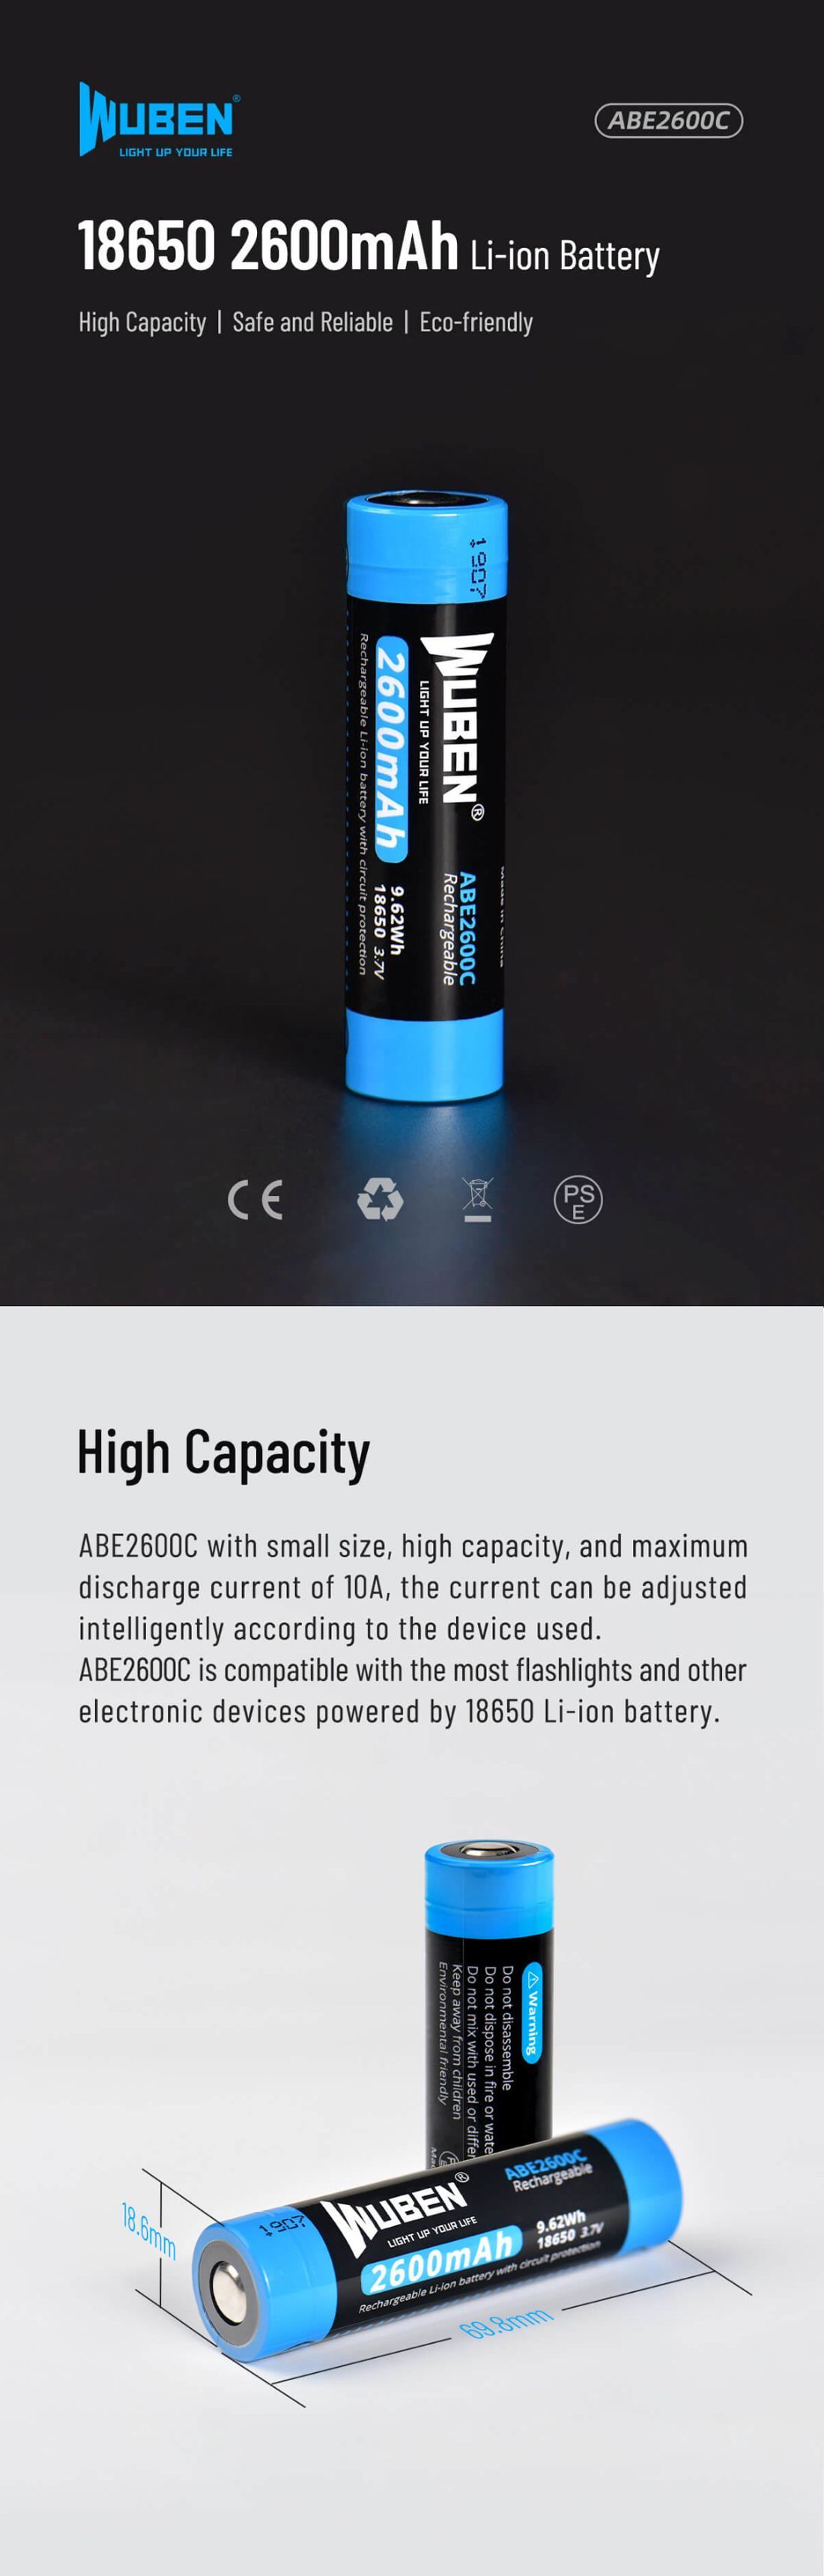 WUBEN-ABE2600C-18650-2600mAh-Rechargeable-Li-ion-Battery-with-Protection-Board-High-Capacity-LED-Fla-1730169